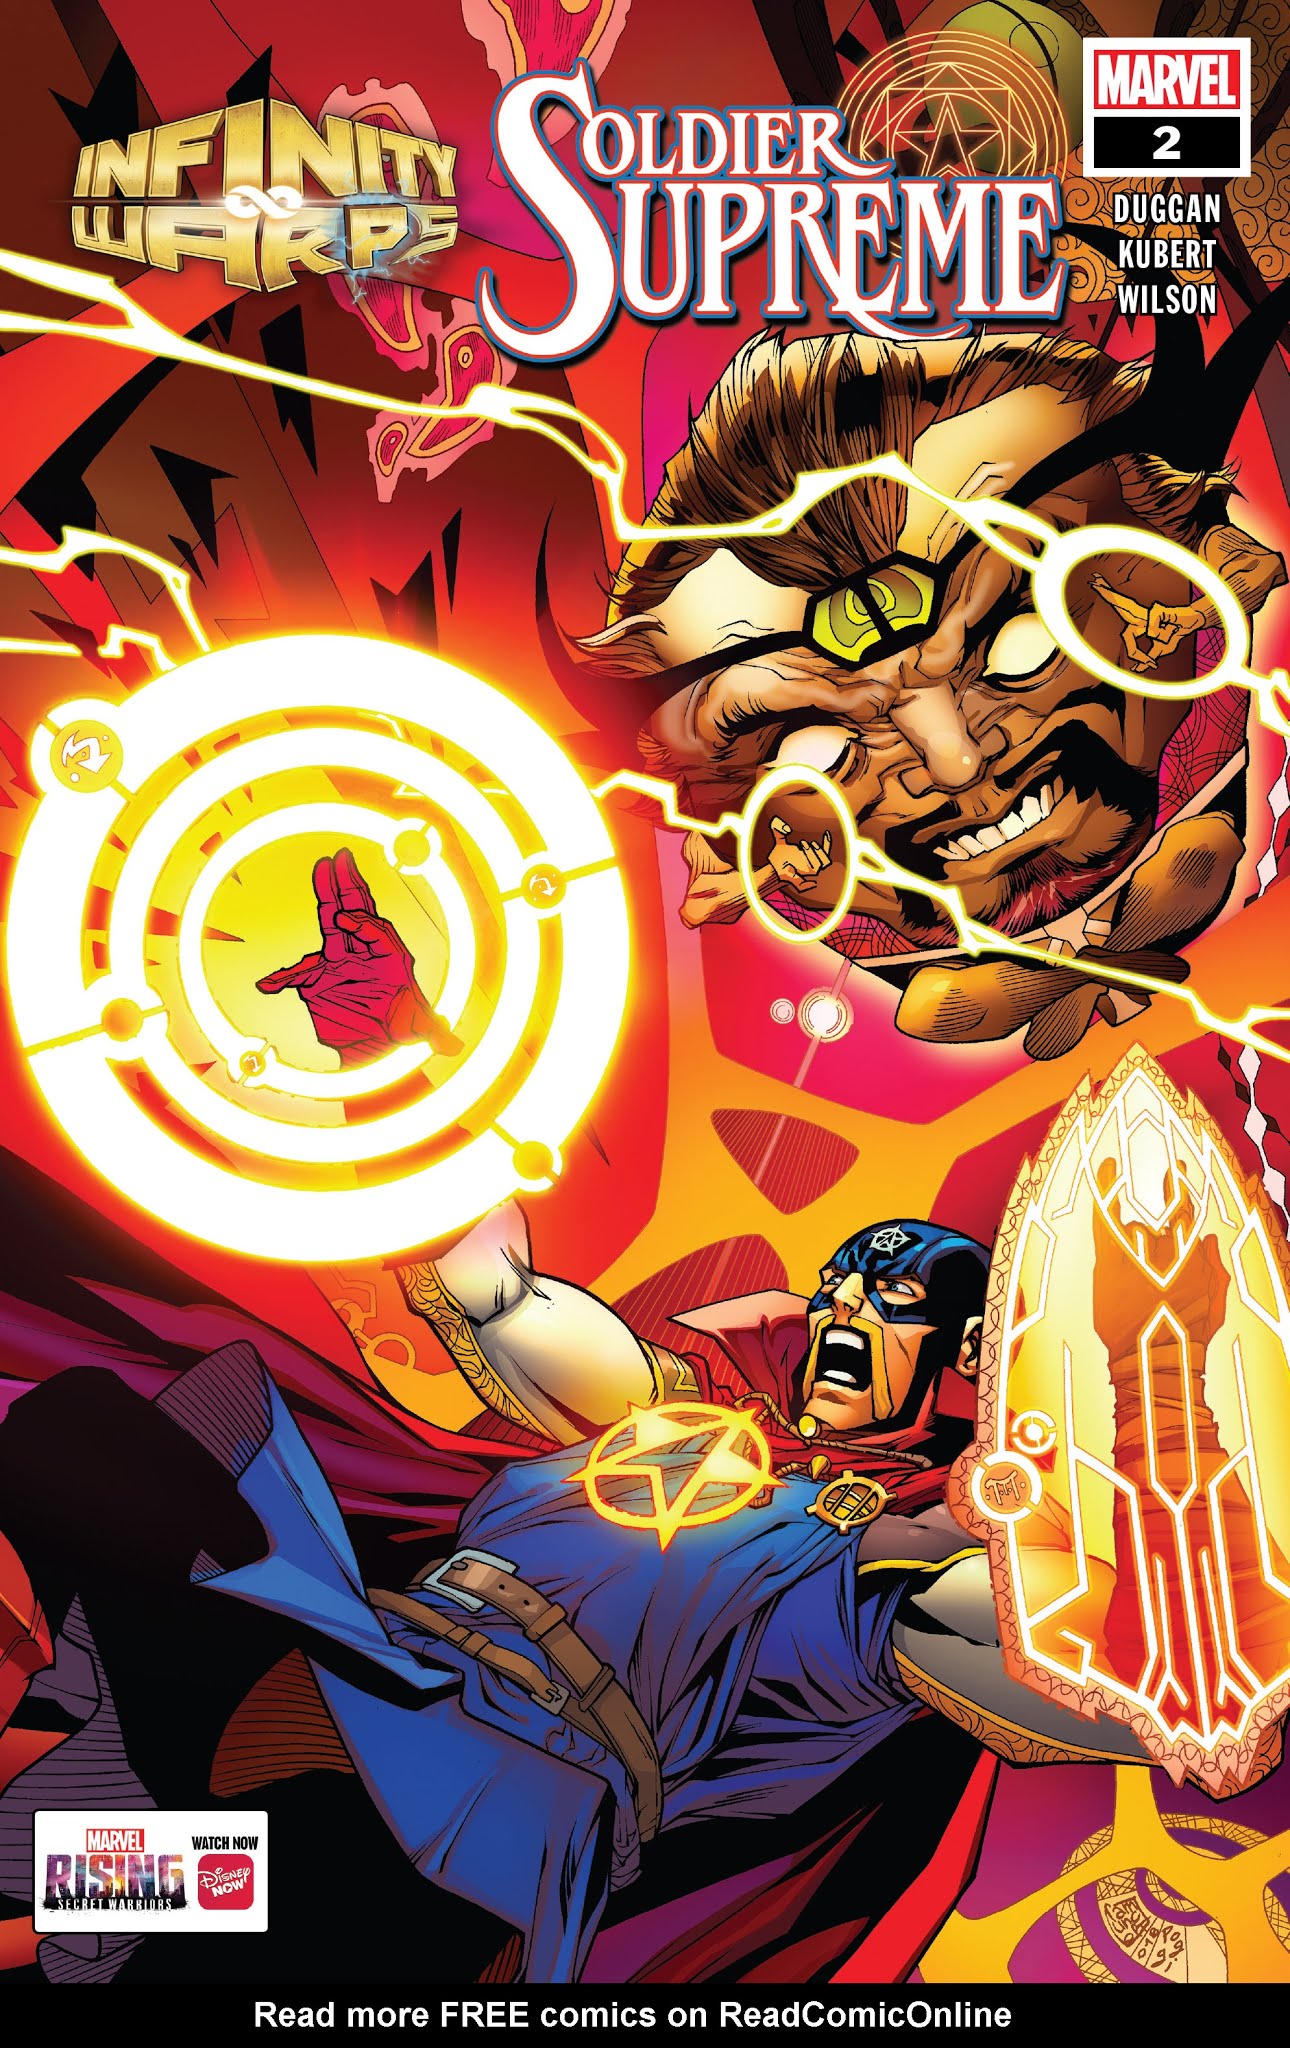 Read online Infinity Wars: Soldier Supreme comic -  Issue #2 - 1